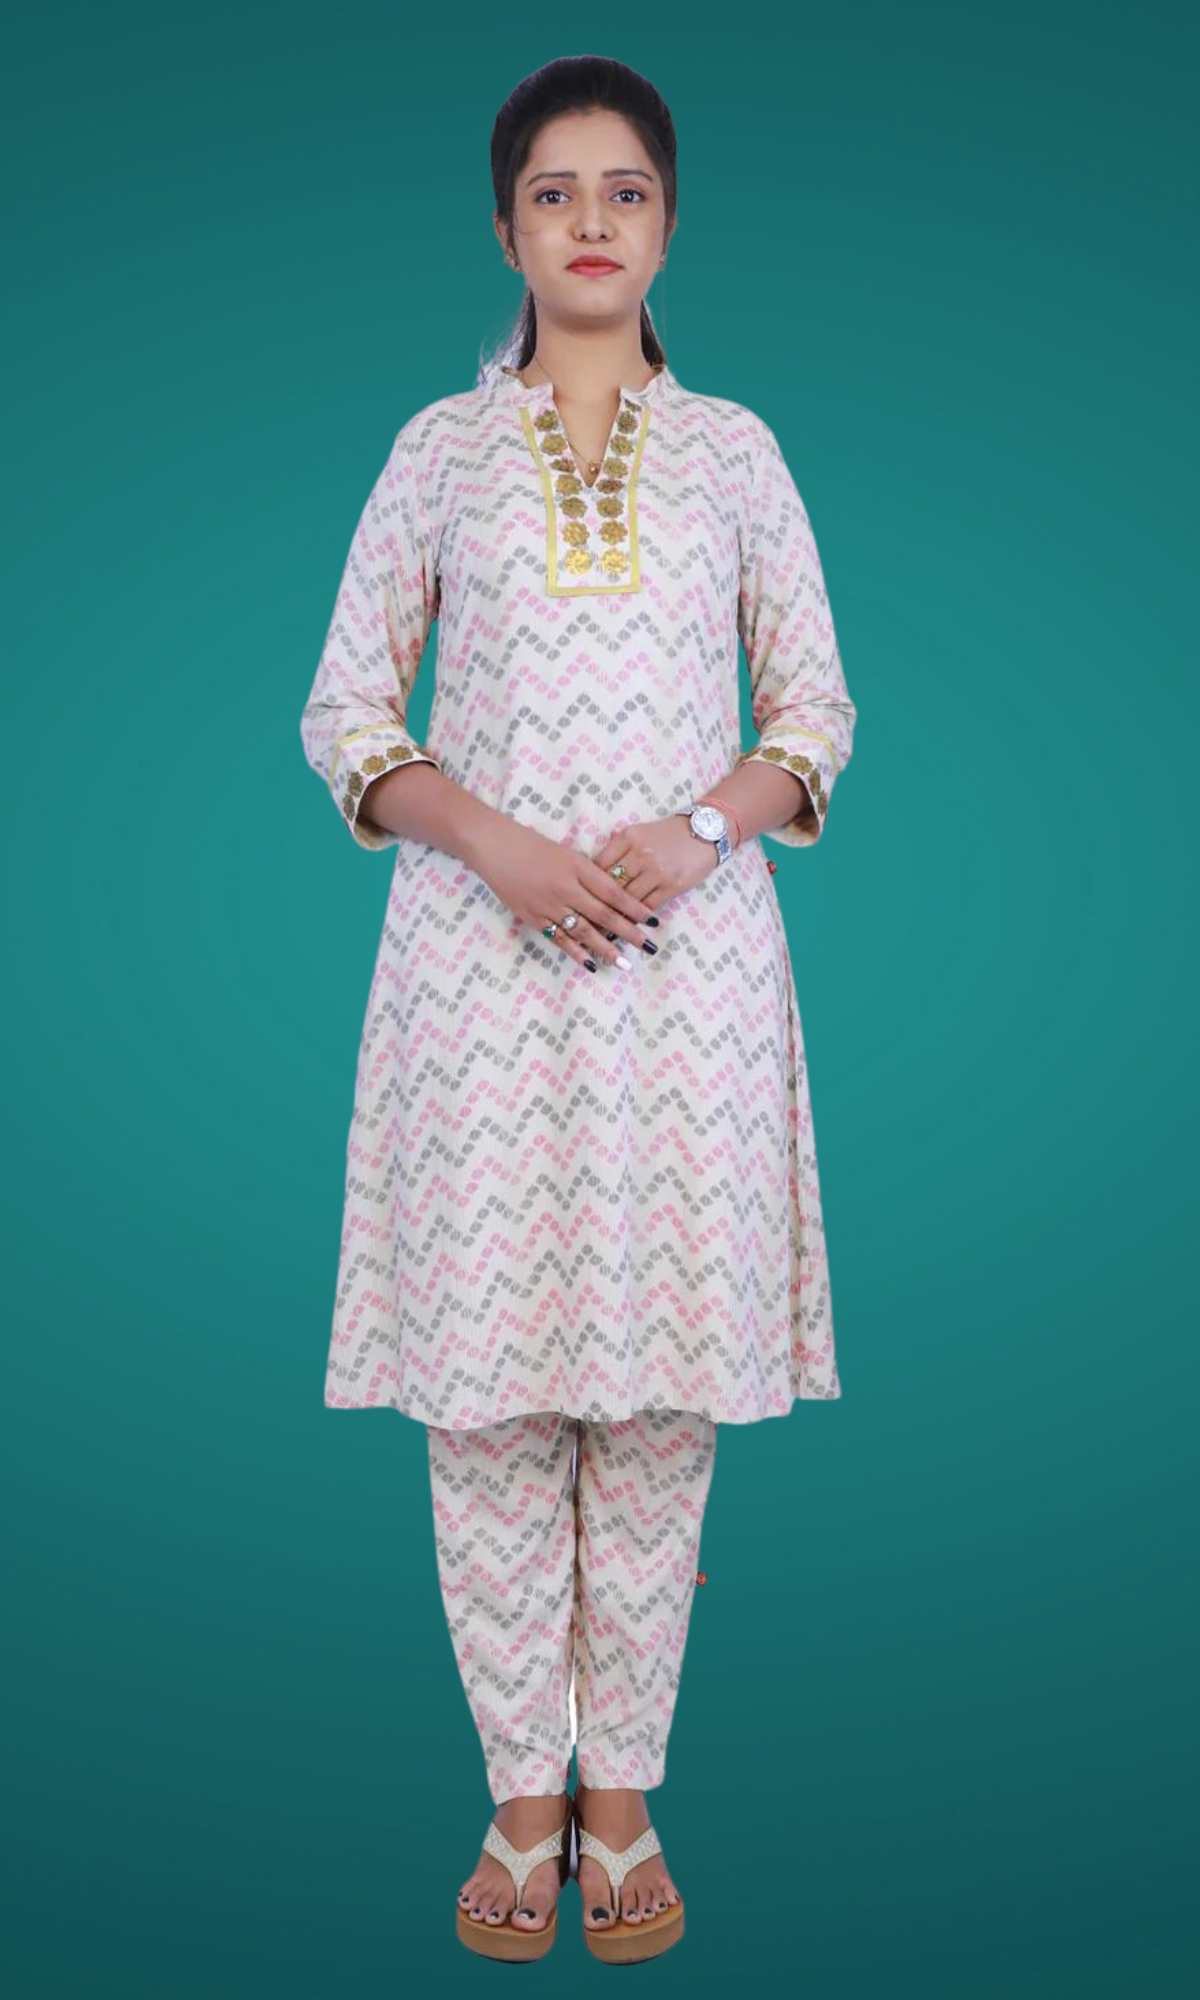 Low Price Offer on Kurta Sets for Women